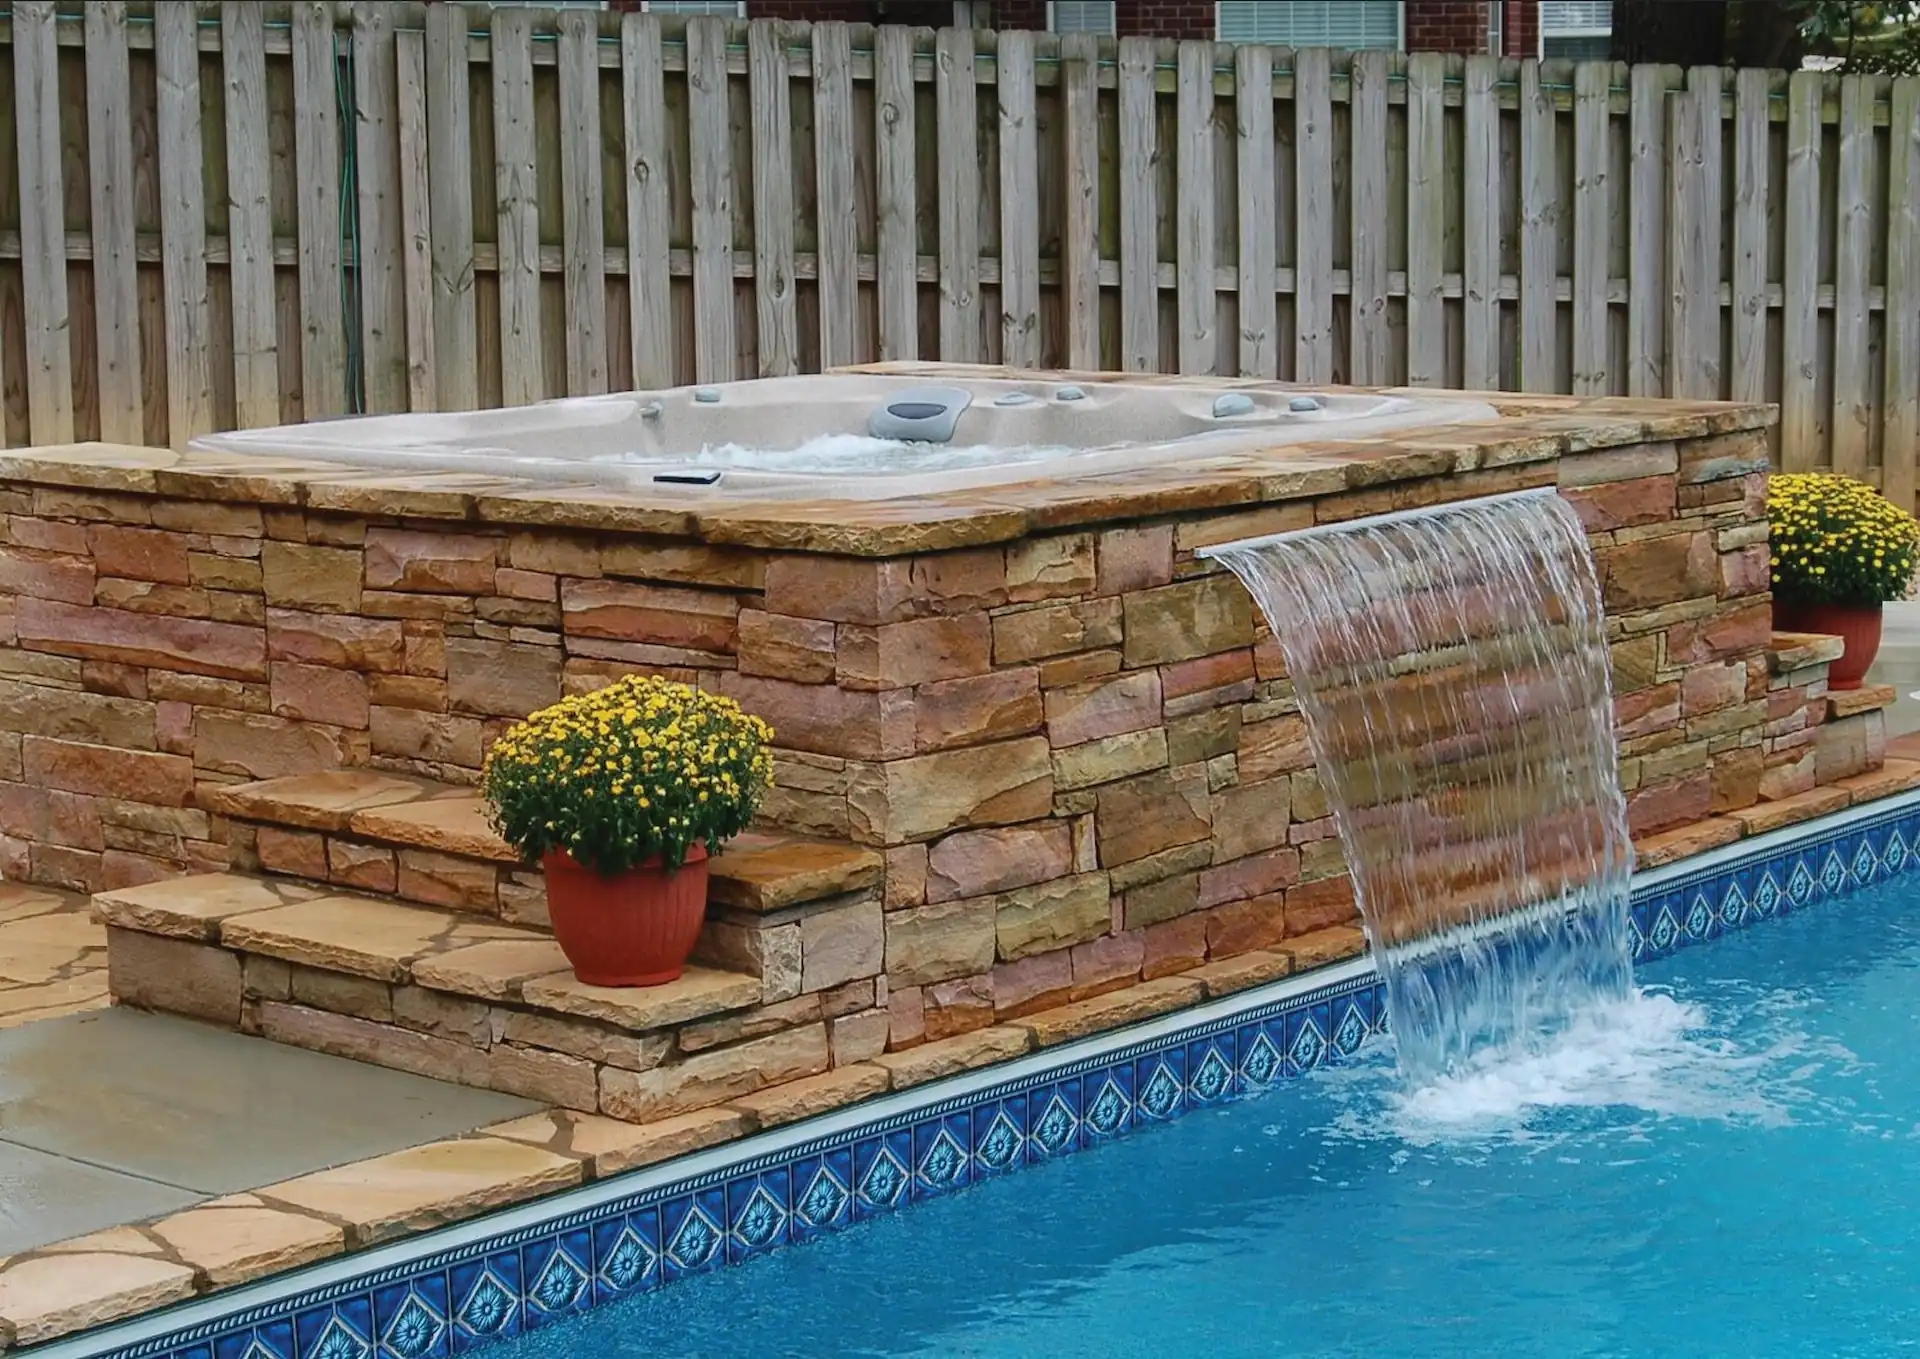 The Pool and Hot Tub Combo: How to Incorporate Both Into Your Backyard